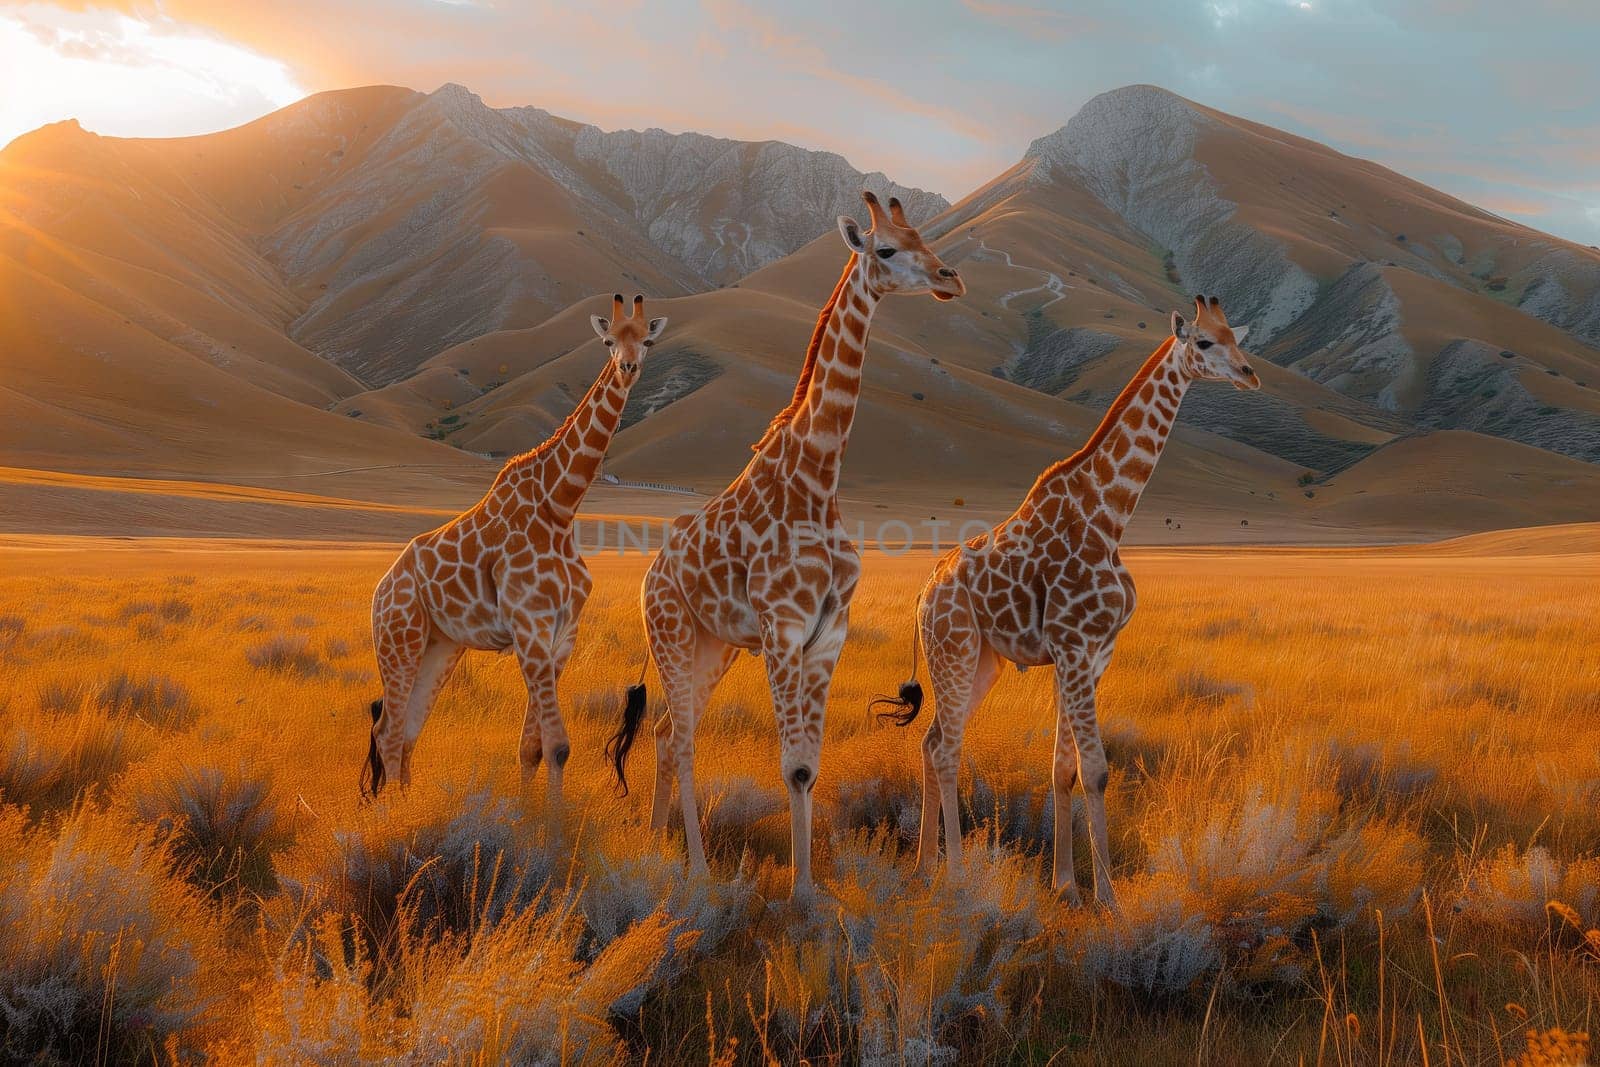 Three Giraffidae are peacefully grazing in a scenic natural landscape with mountains in the background, surrounded by a diverse plant community and a clear sky